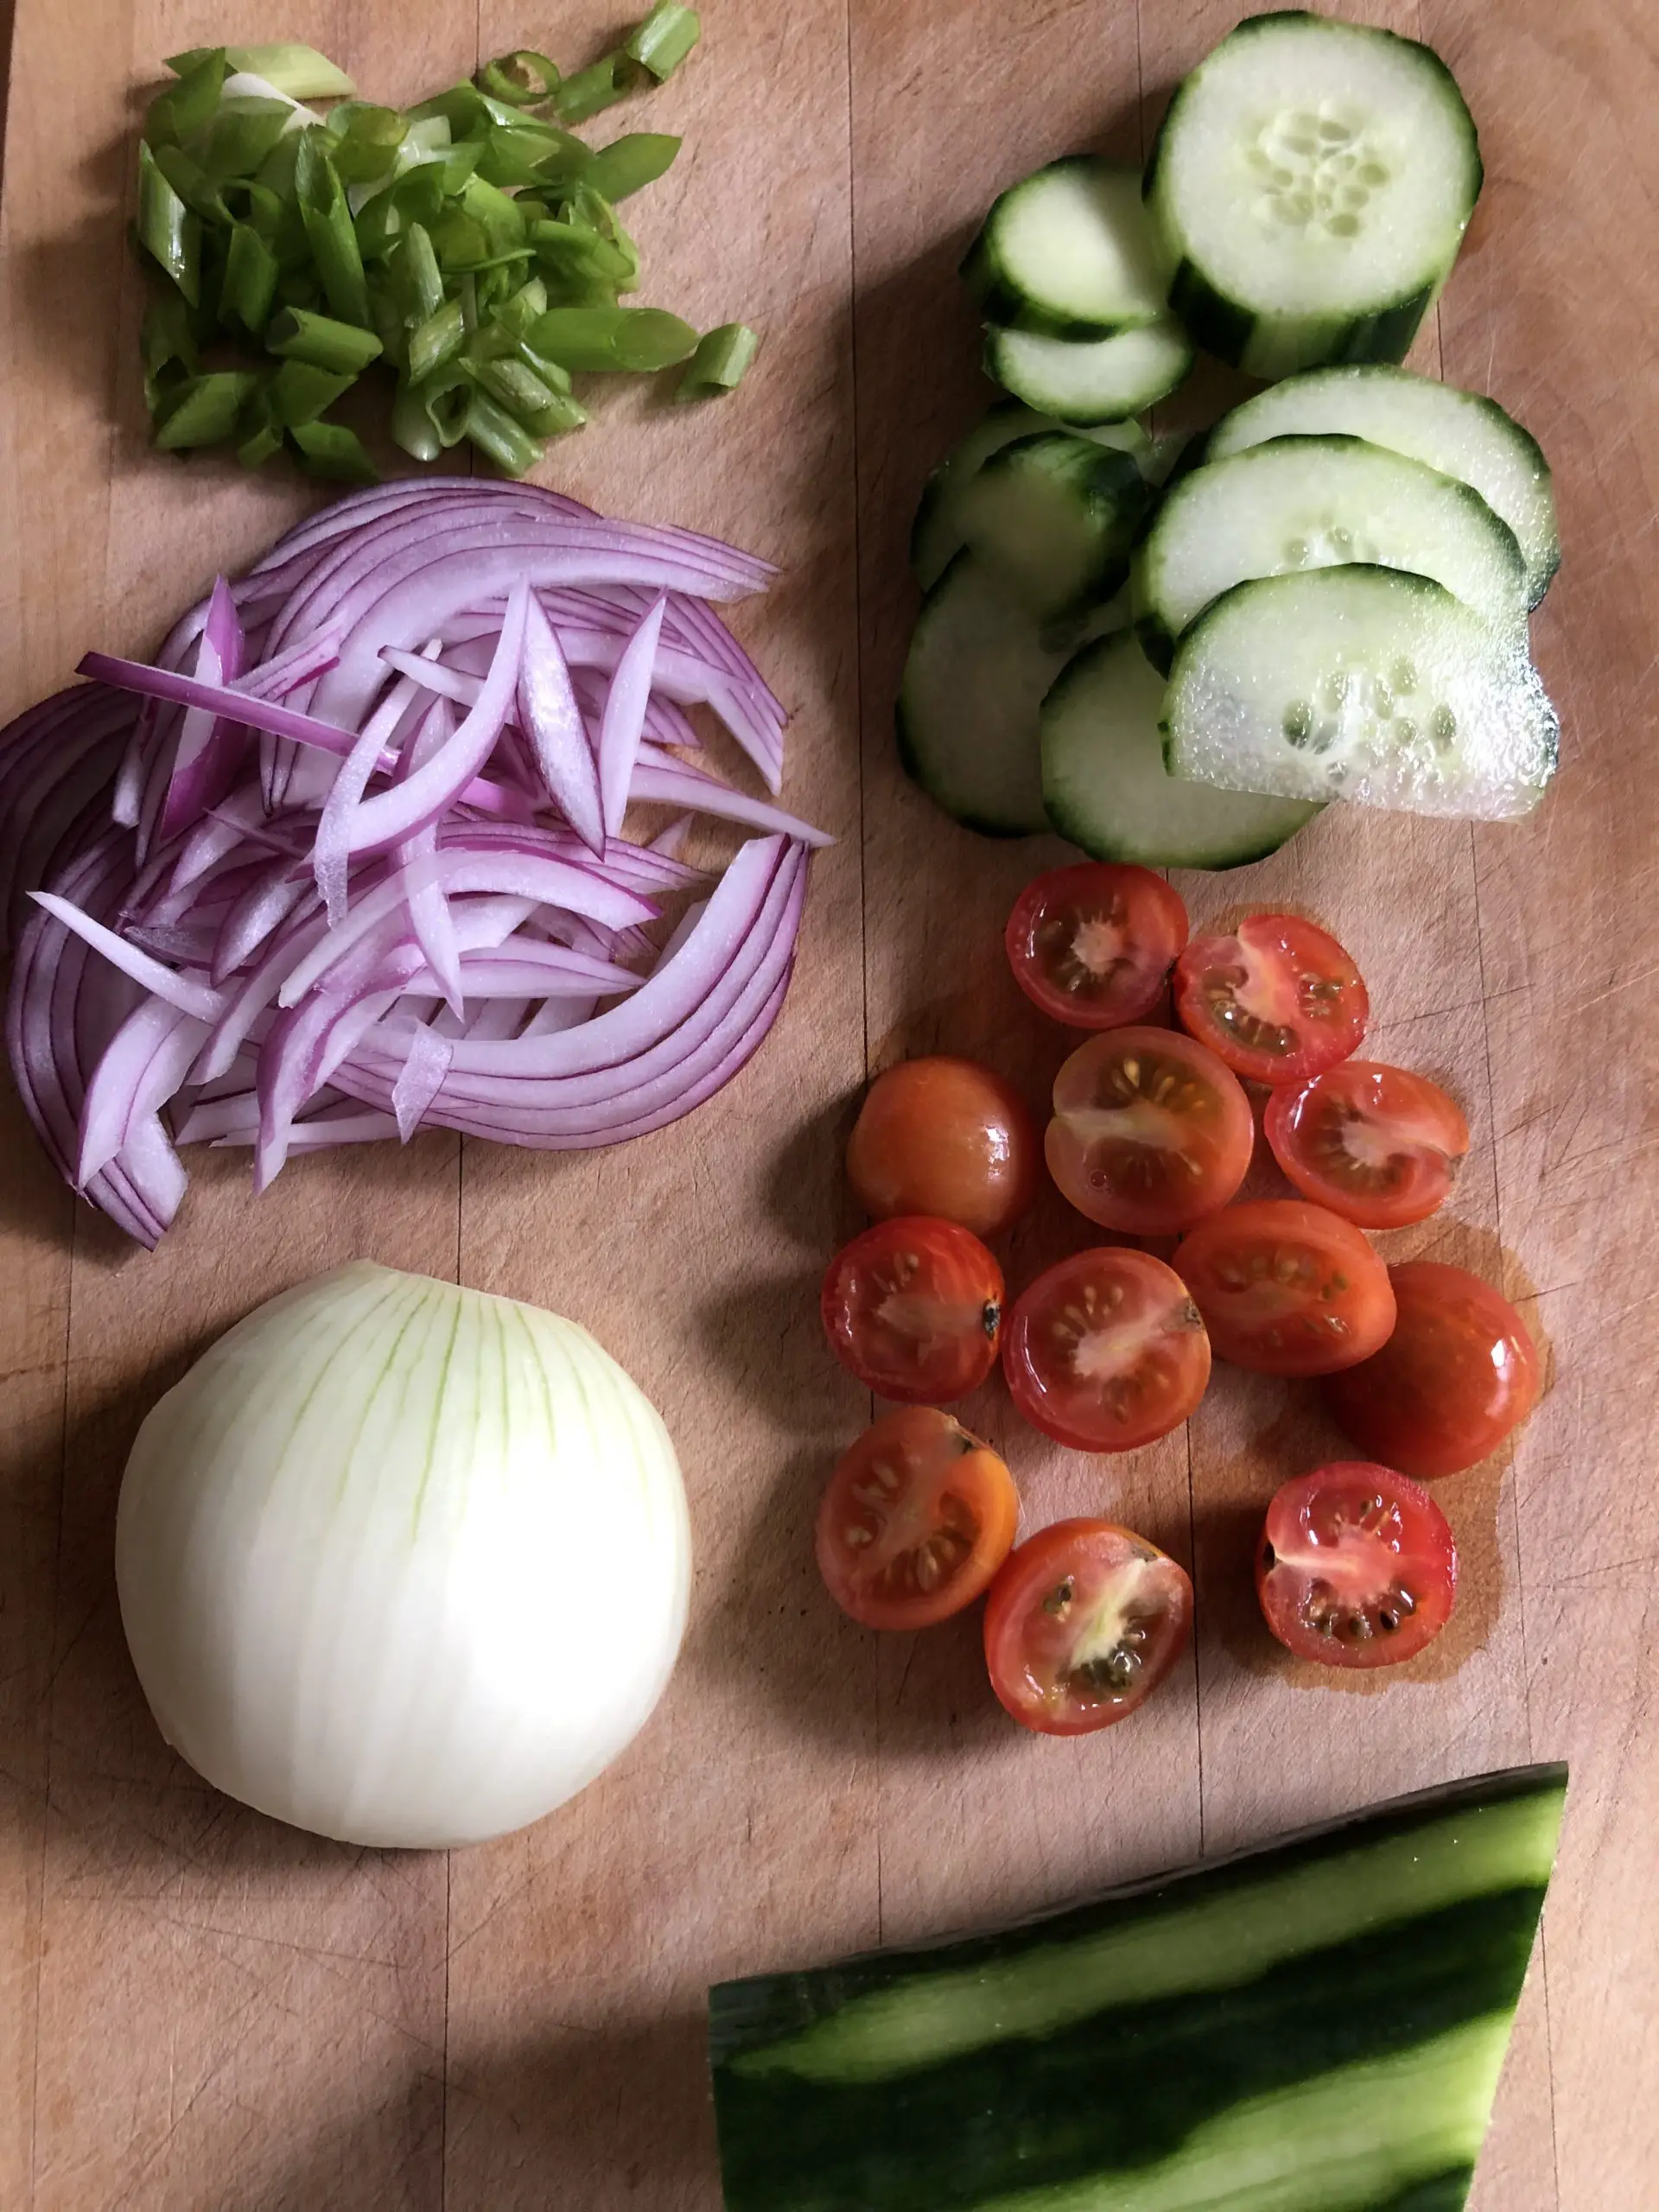 Sliced red onion, sliced green onion, half of a yellow onion, sliced cucumber, cherry tomatoes cut in half, cucumber with skin peeled off in intervals